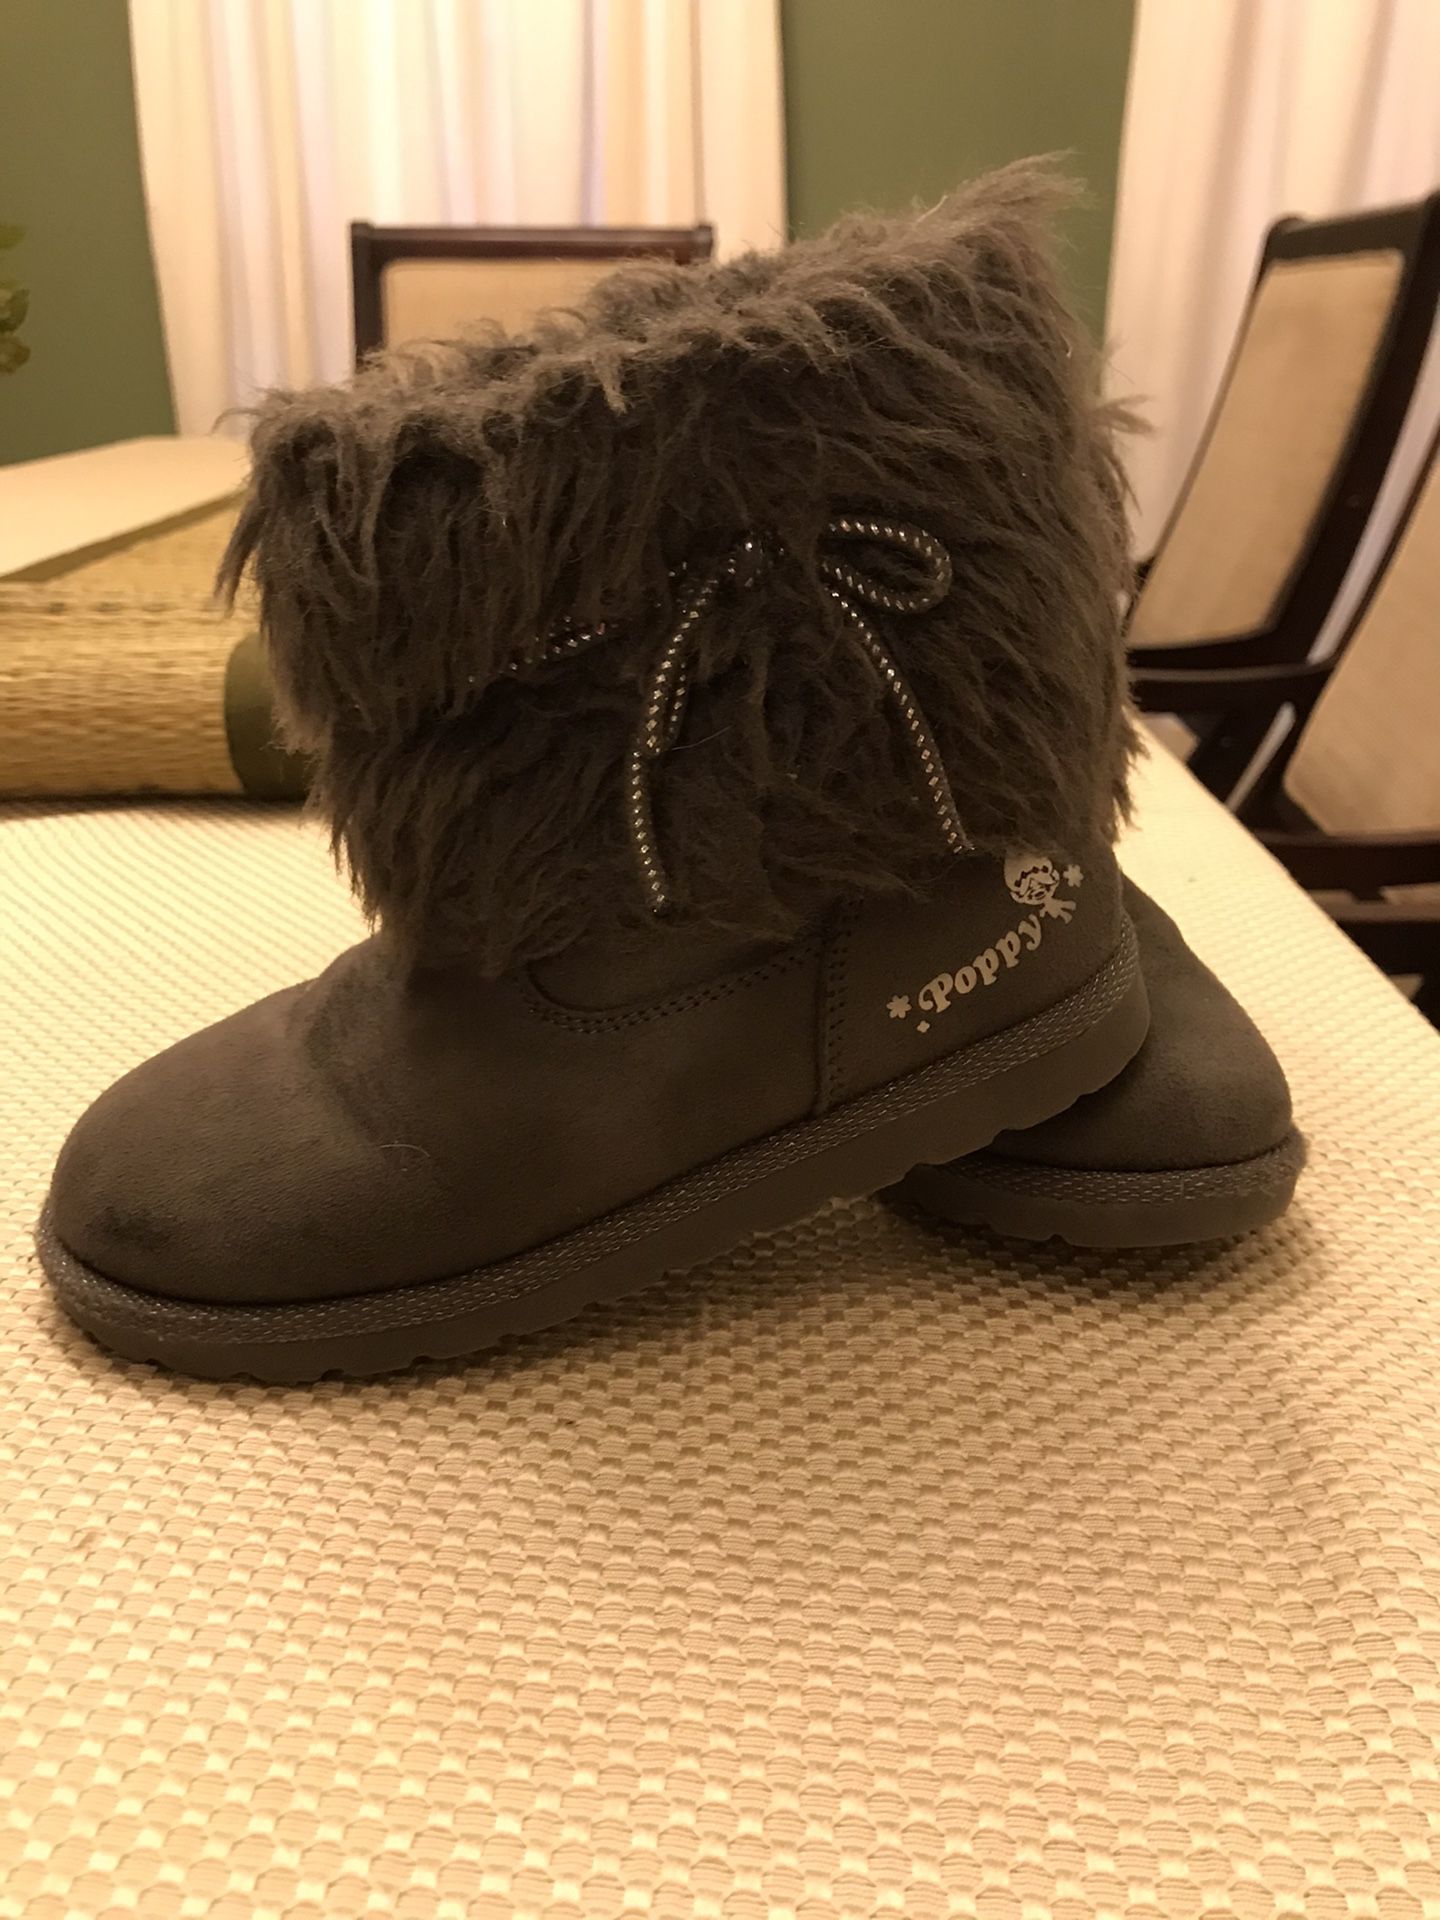 Size 13.5 Girl Gray Boots from Trolls